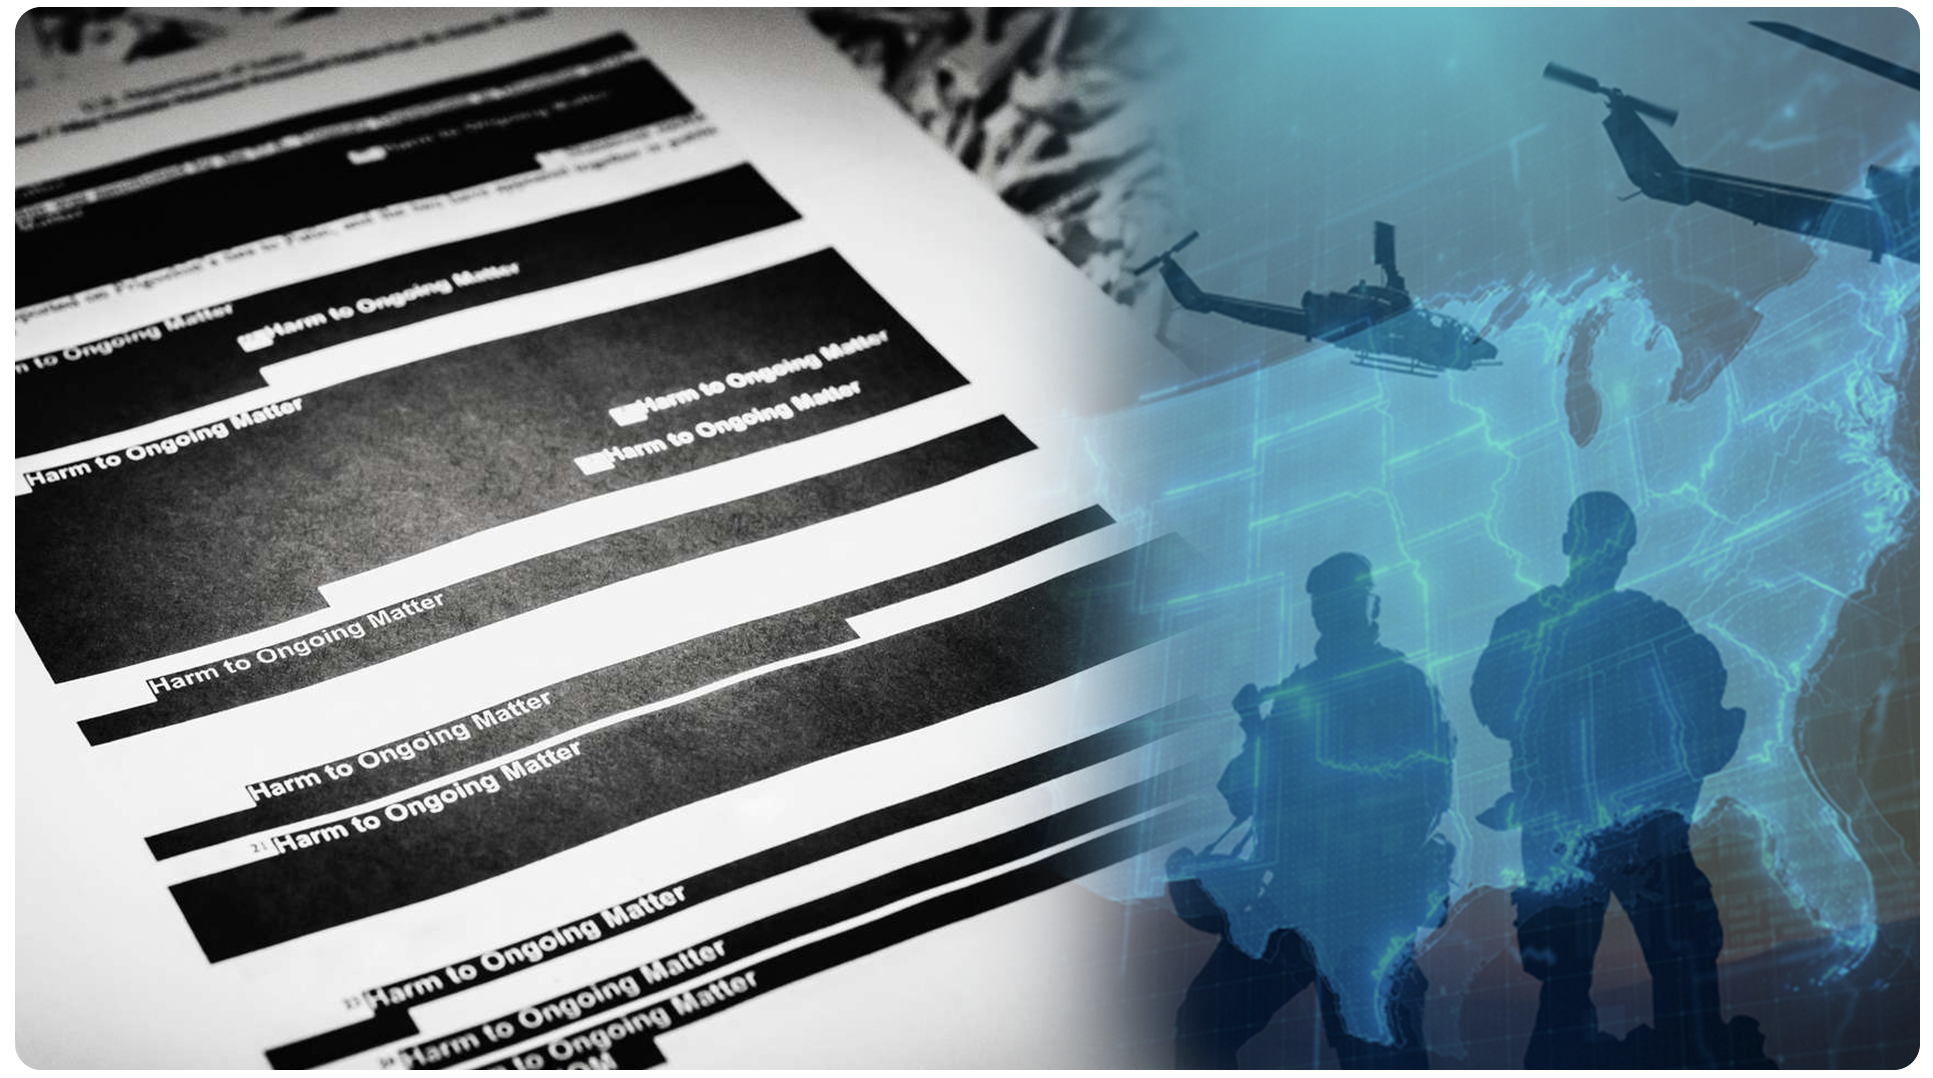 Hero picture: Representation of a redacted document to the left, fading into silhouetted military helicoptors and foot soldiers overlaying a bright blue outline of the U.S. logo map (contiguous states)